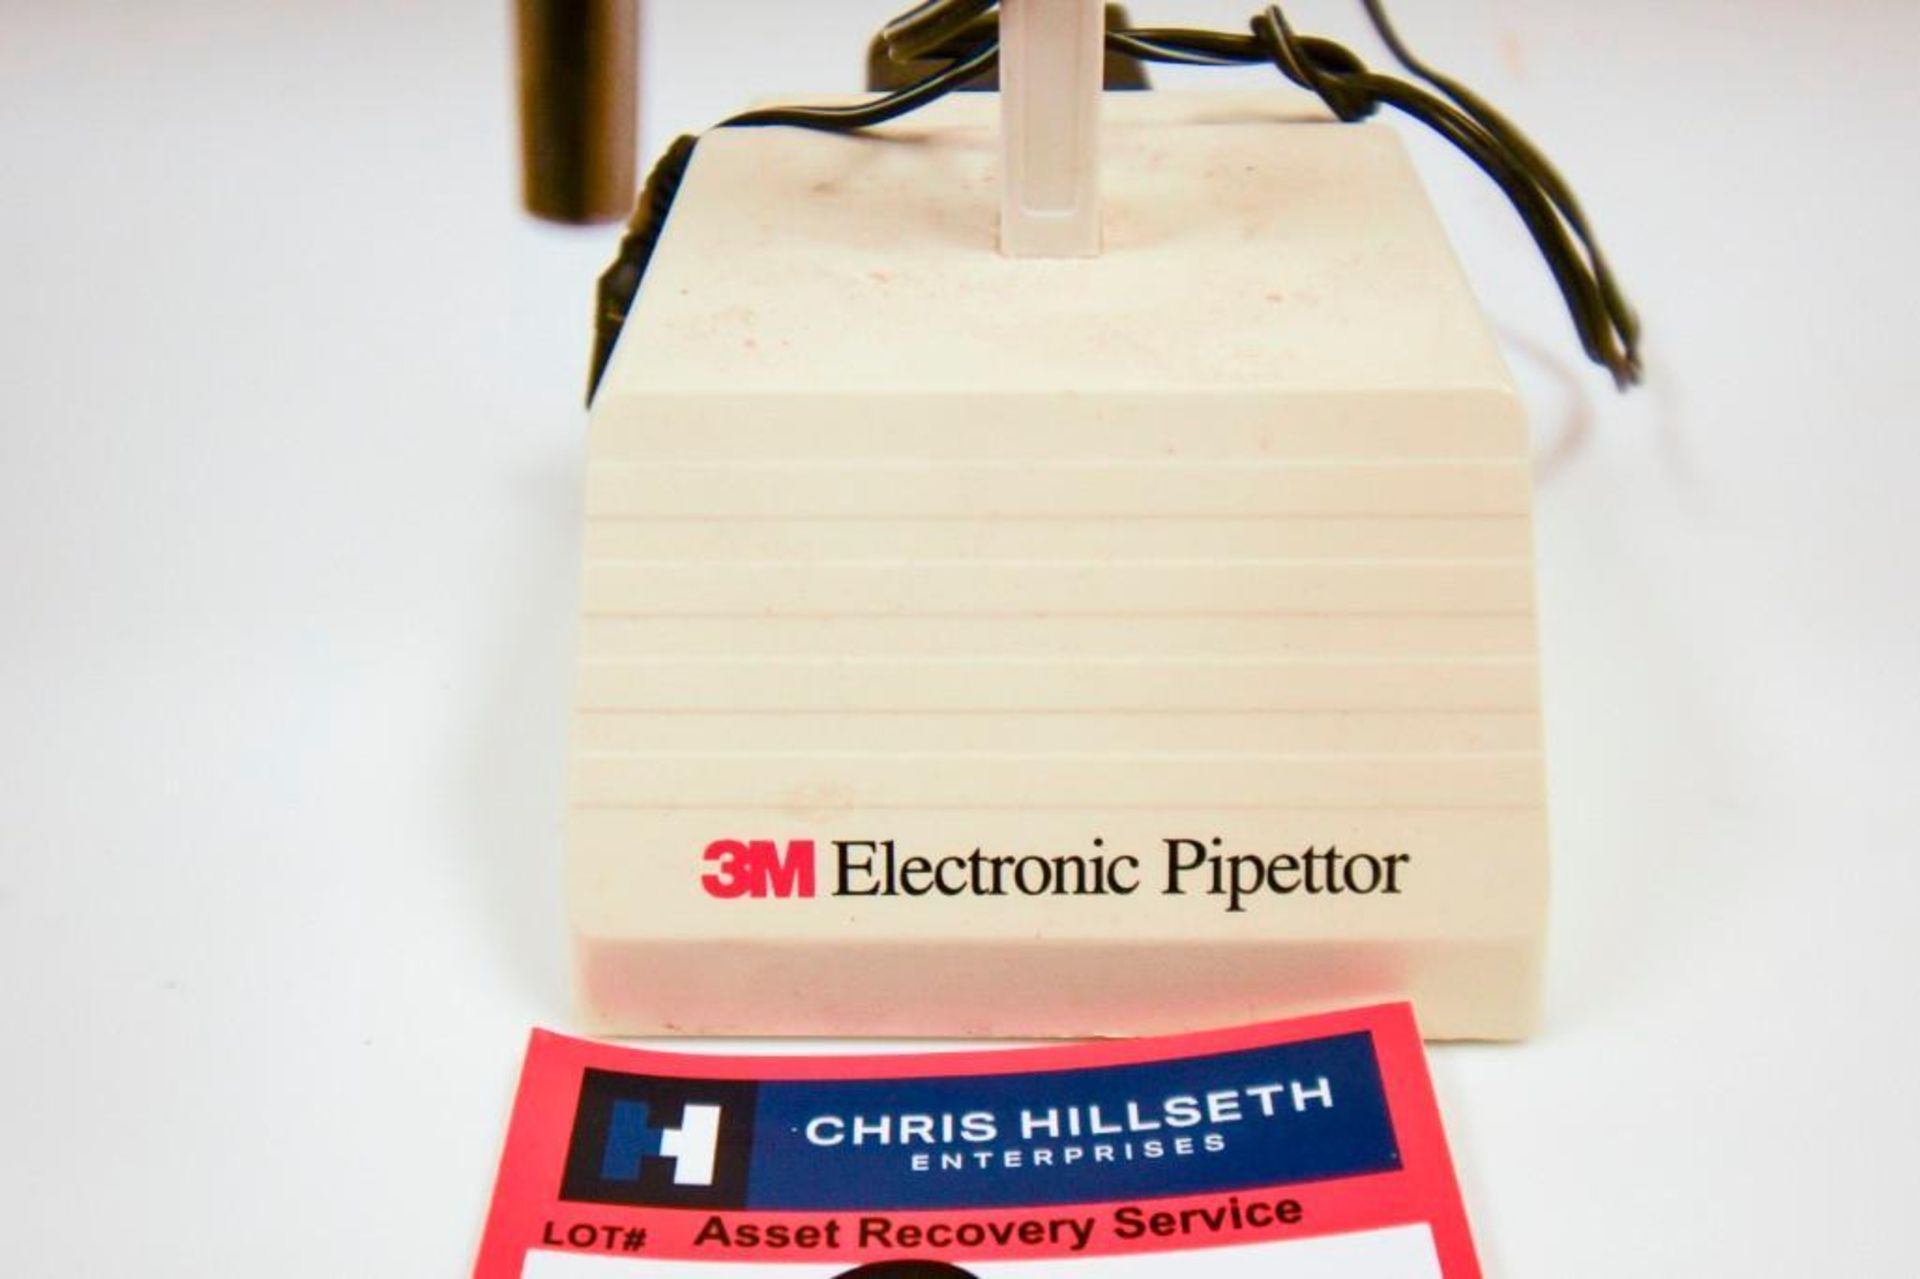 3M Electronic Pippettor - Image 5 of 6